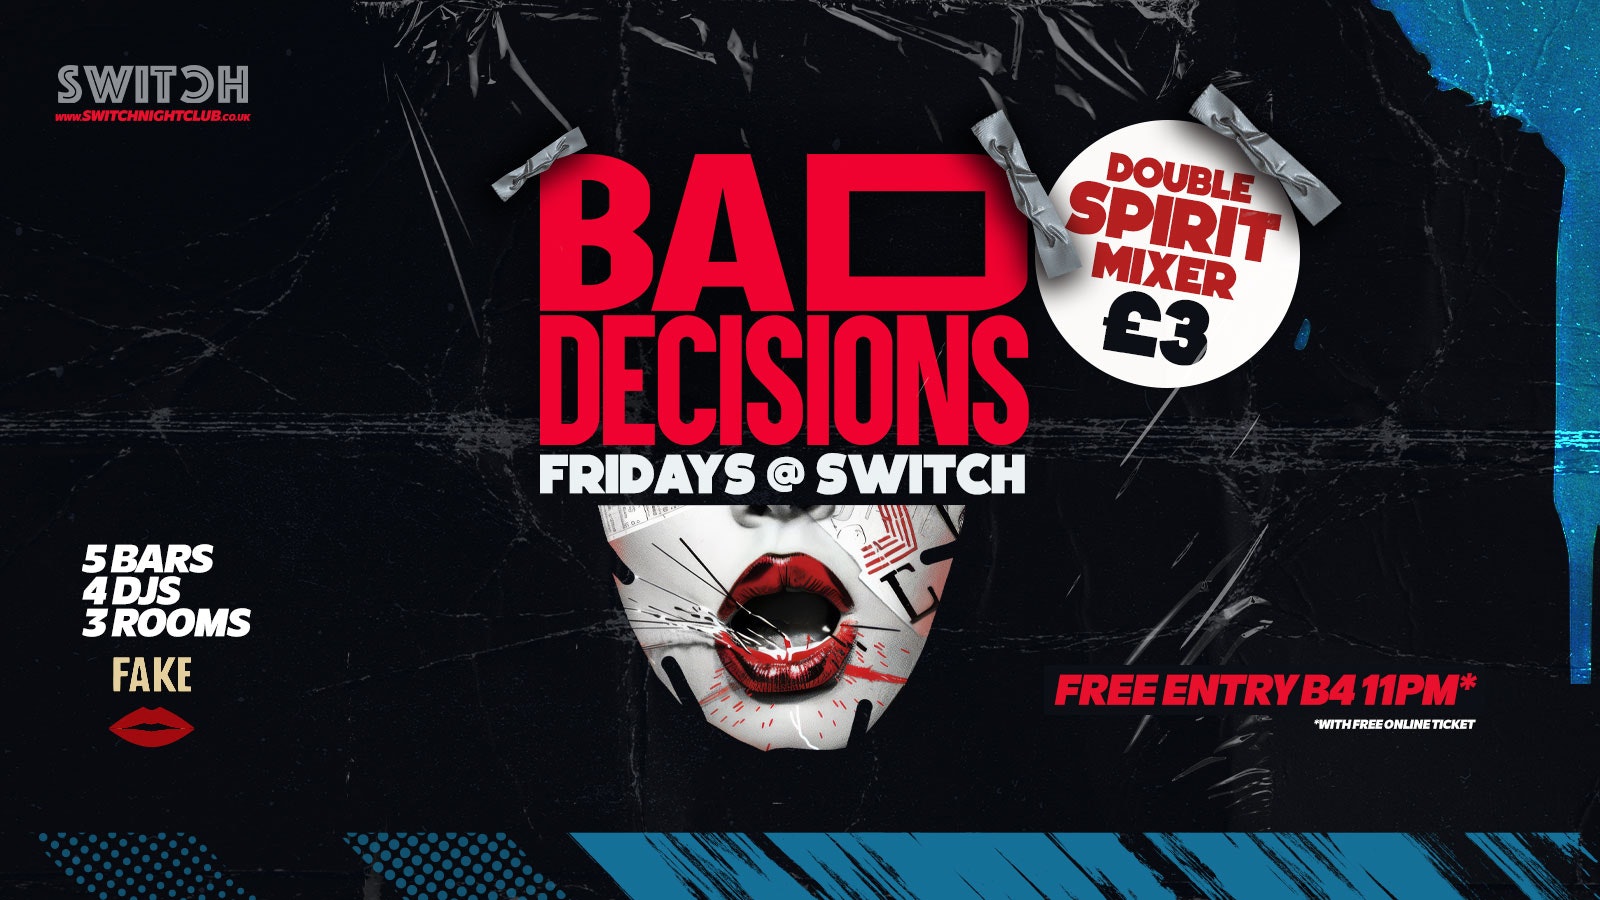 Bad Decisions | Fridays @ SWITCH | £3 DBL Spirit Mixers ALL NIGHT